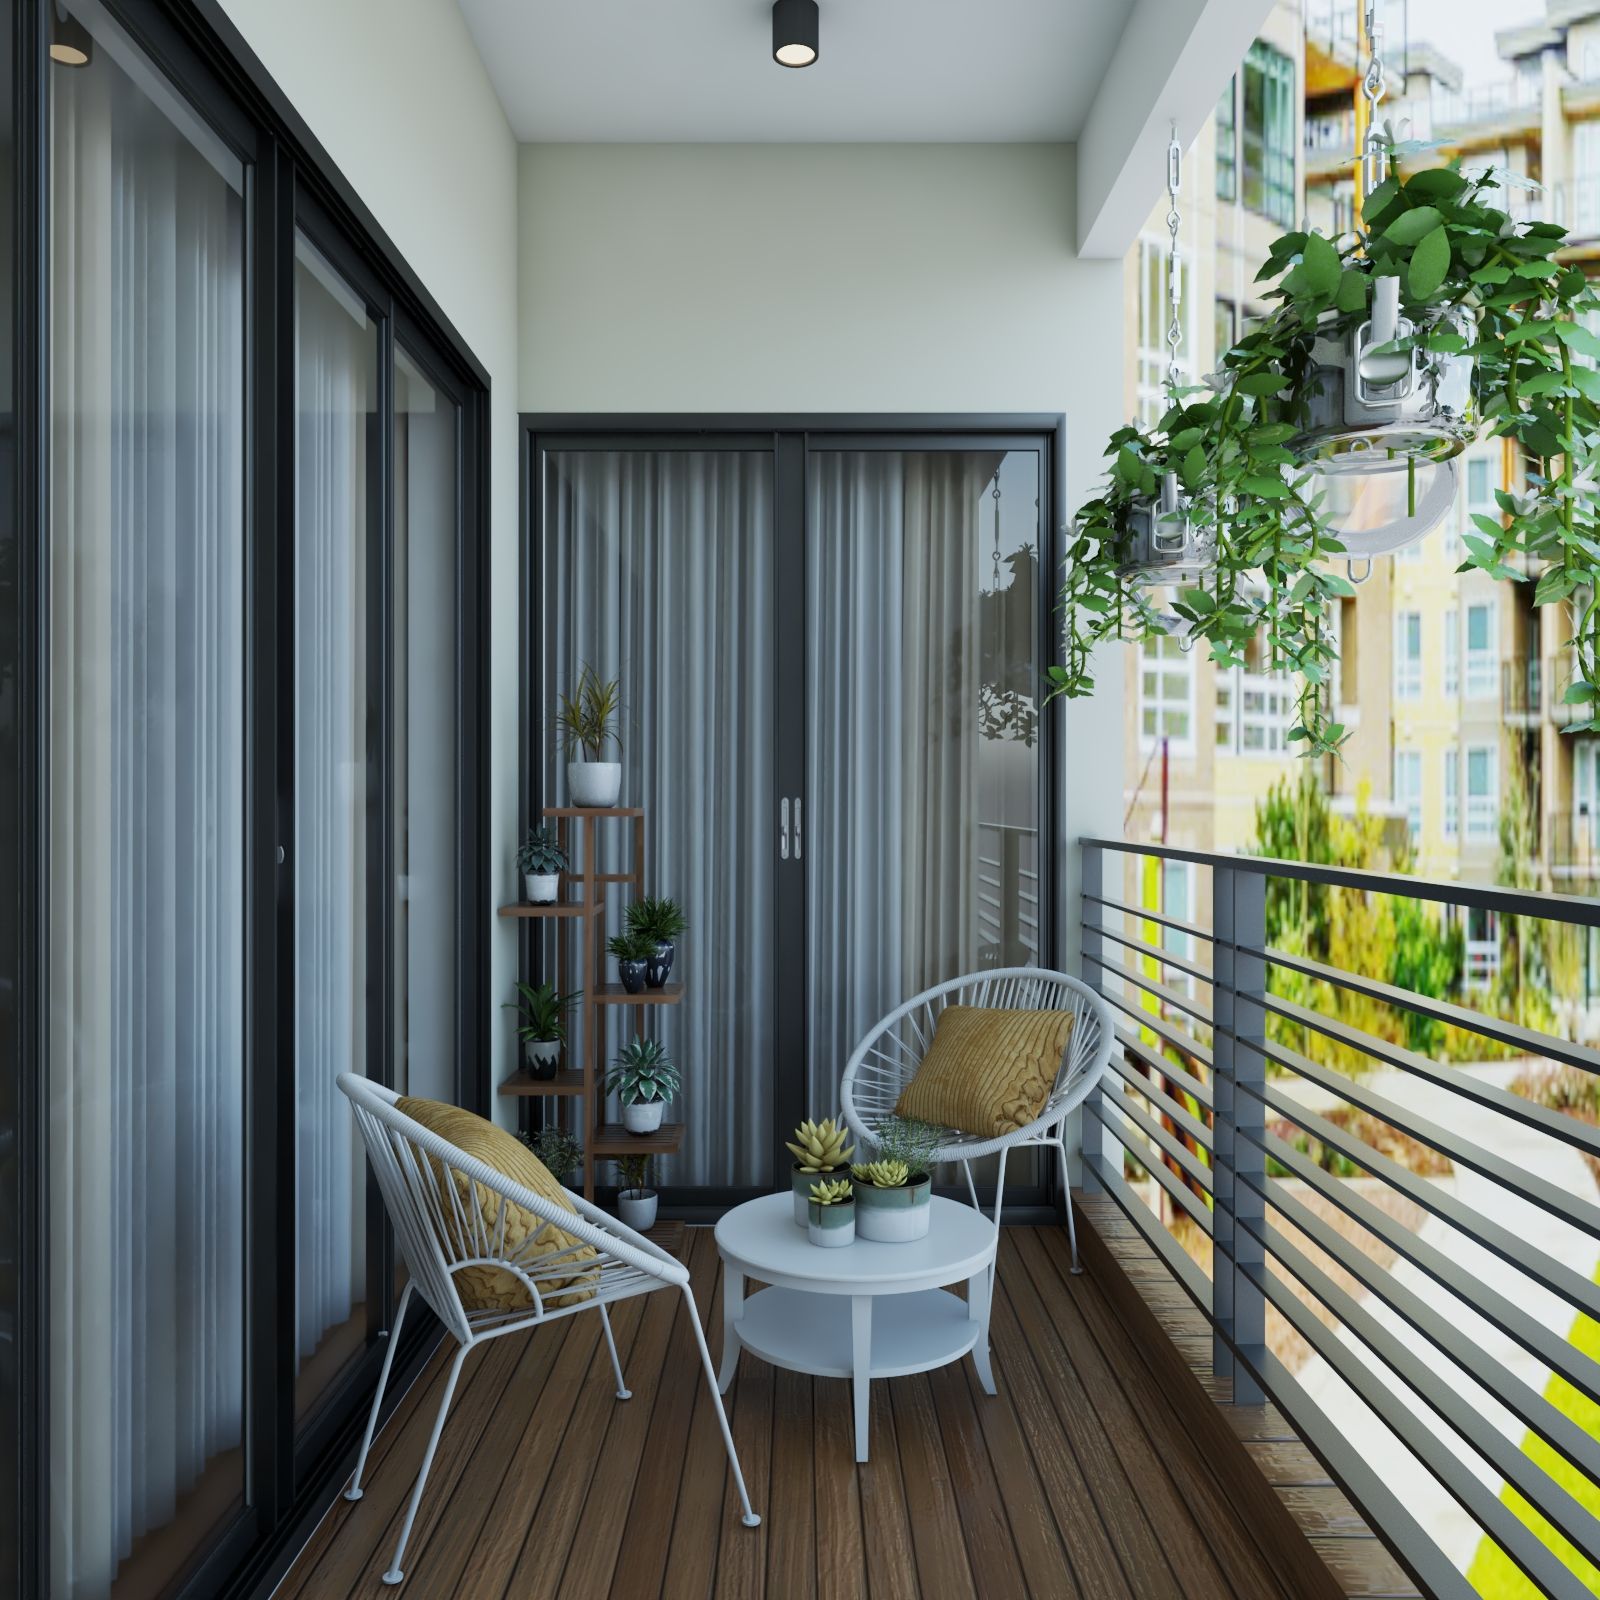 Tropical Balcony Design With Wooden Flooring